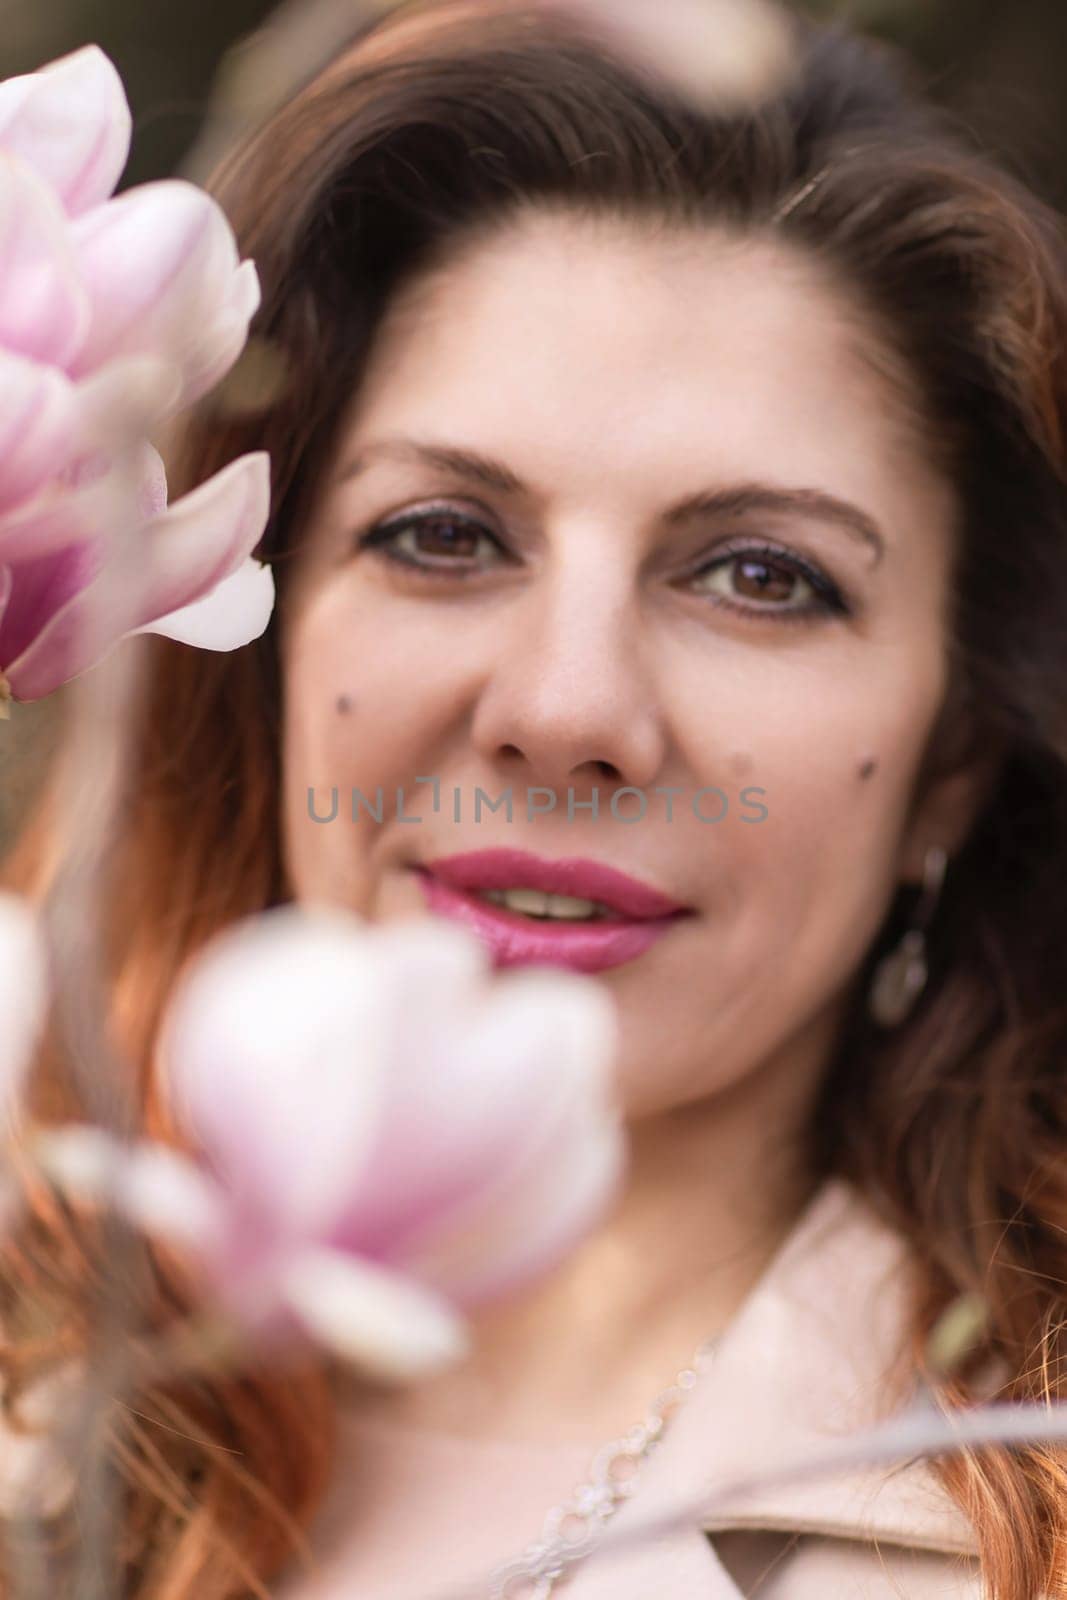 Woman magnolia flowers, surrounded by blossoming trees, hair down, wearing a light coat. Captured during spring, showcasing natural beauty and seasonal change